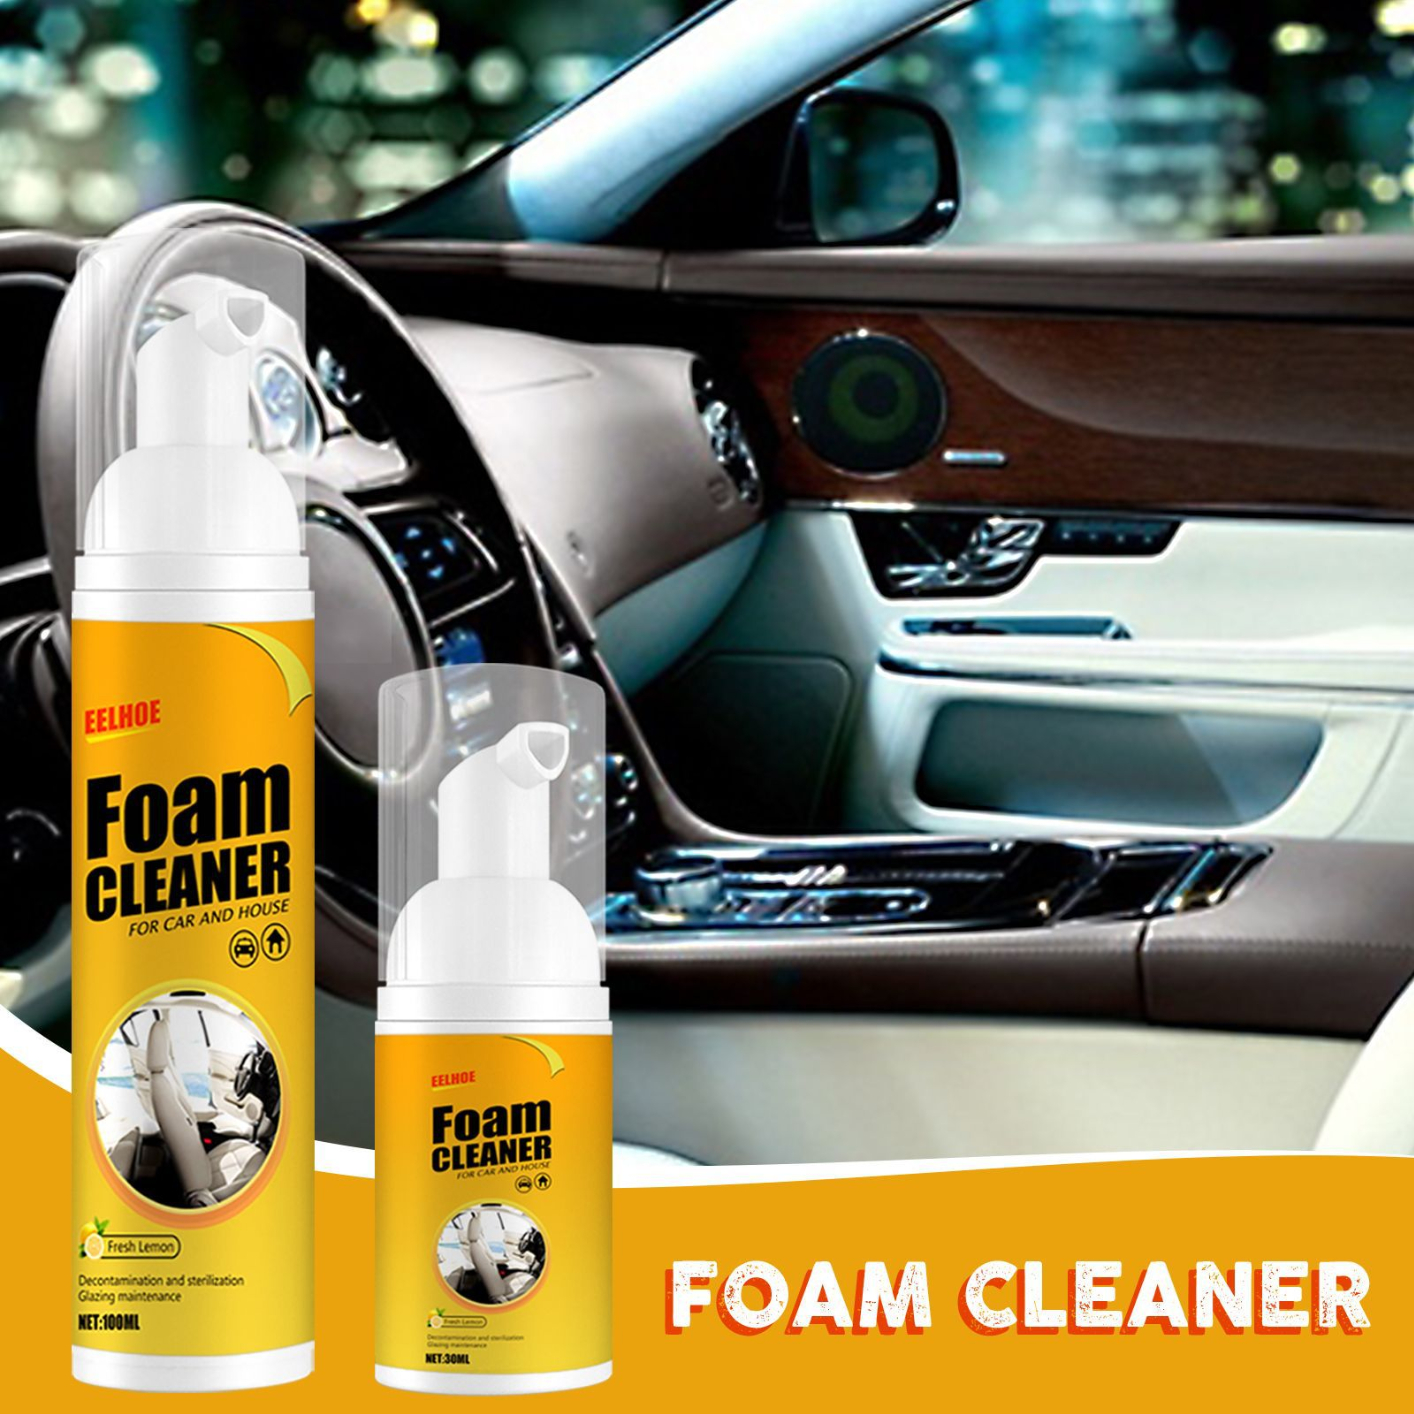 Multipurpose Foam Cleaner Spray,All-Purpose Household Cleaners for Car and Kitchen, Leather Decontamination,Suitable for Car House and Kitchen